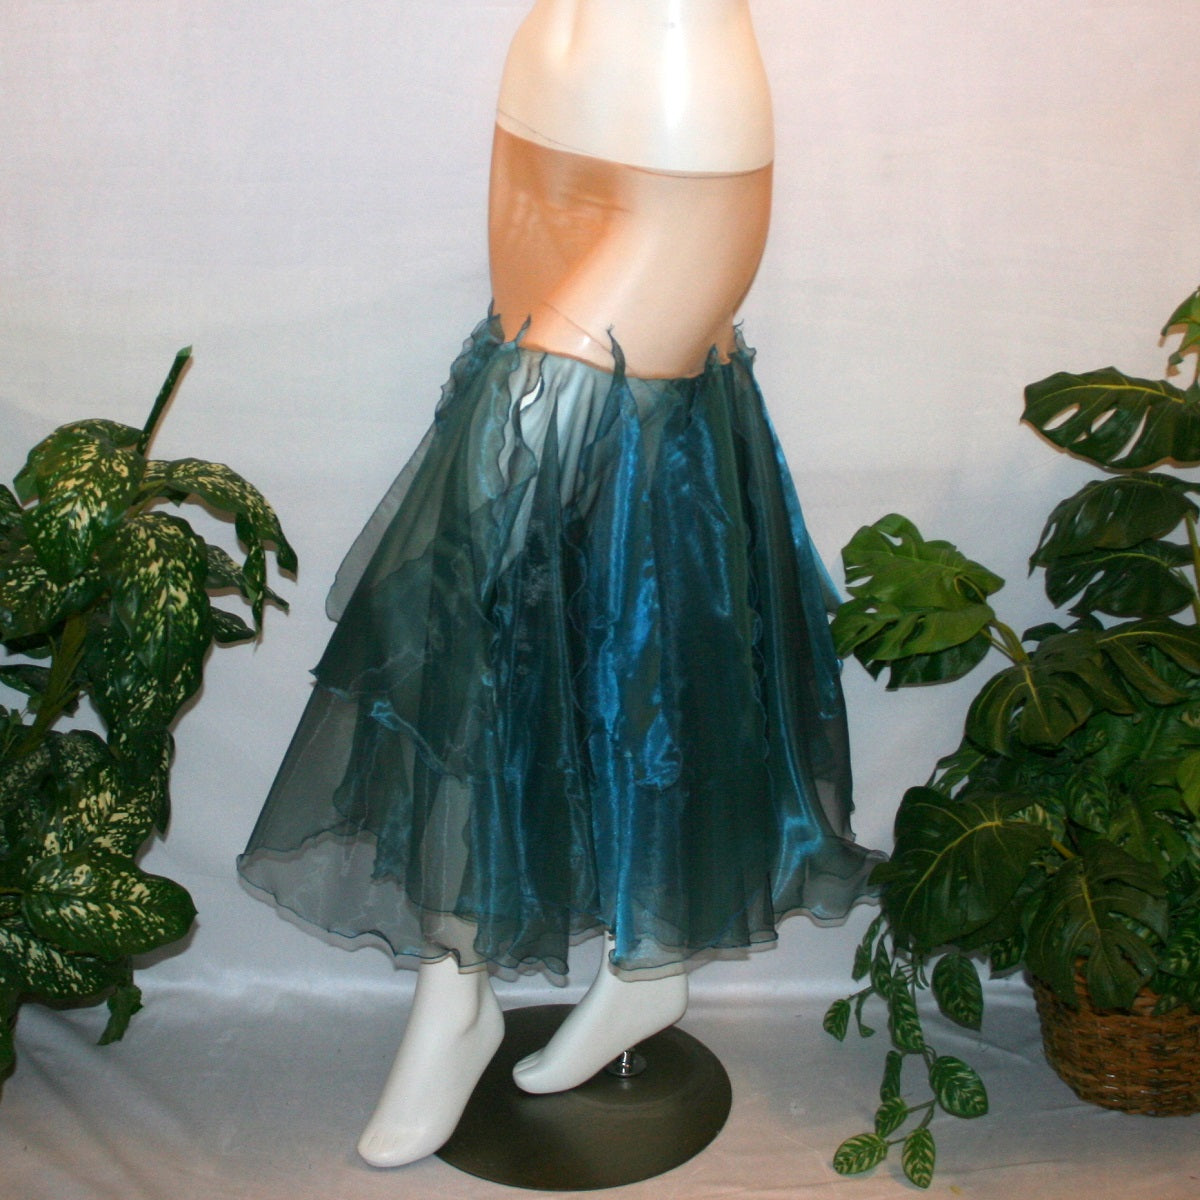 side view of Blue ballroom skirt created with yards of a deep sea blue organza, layers of large petal shaped panels.